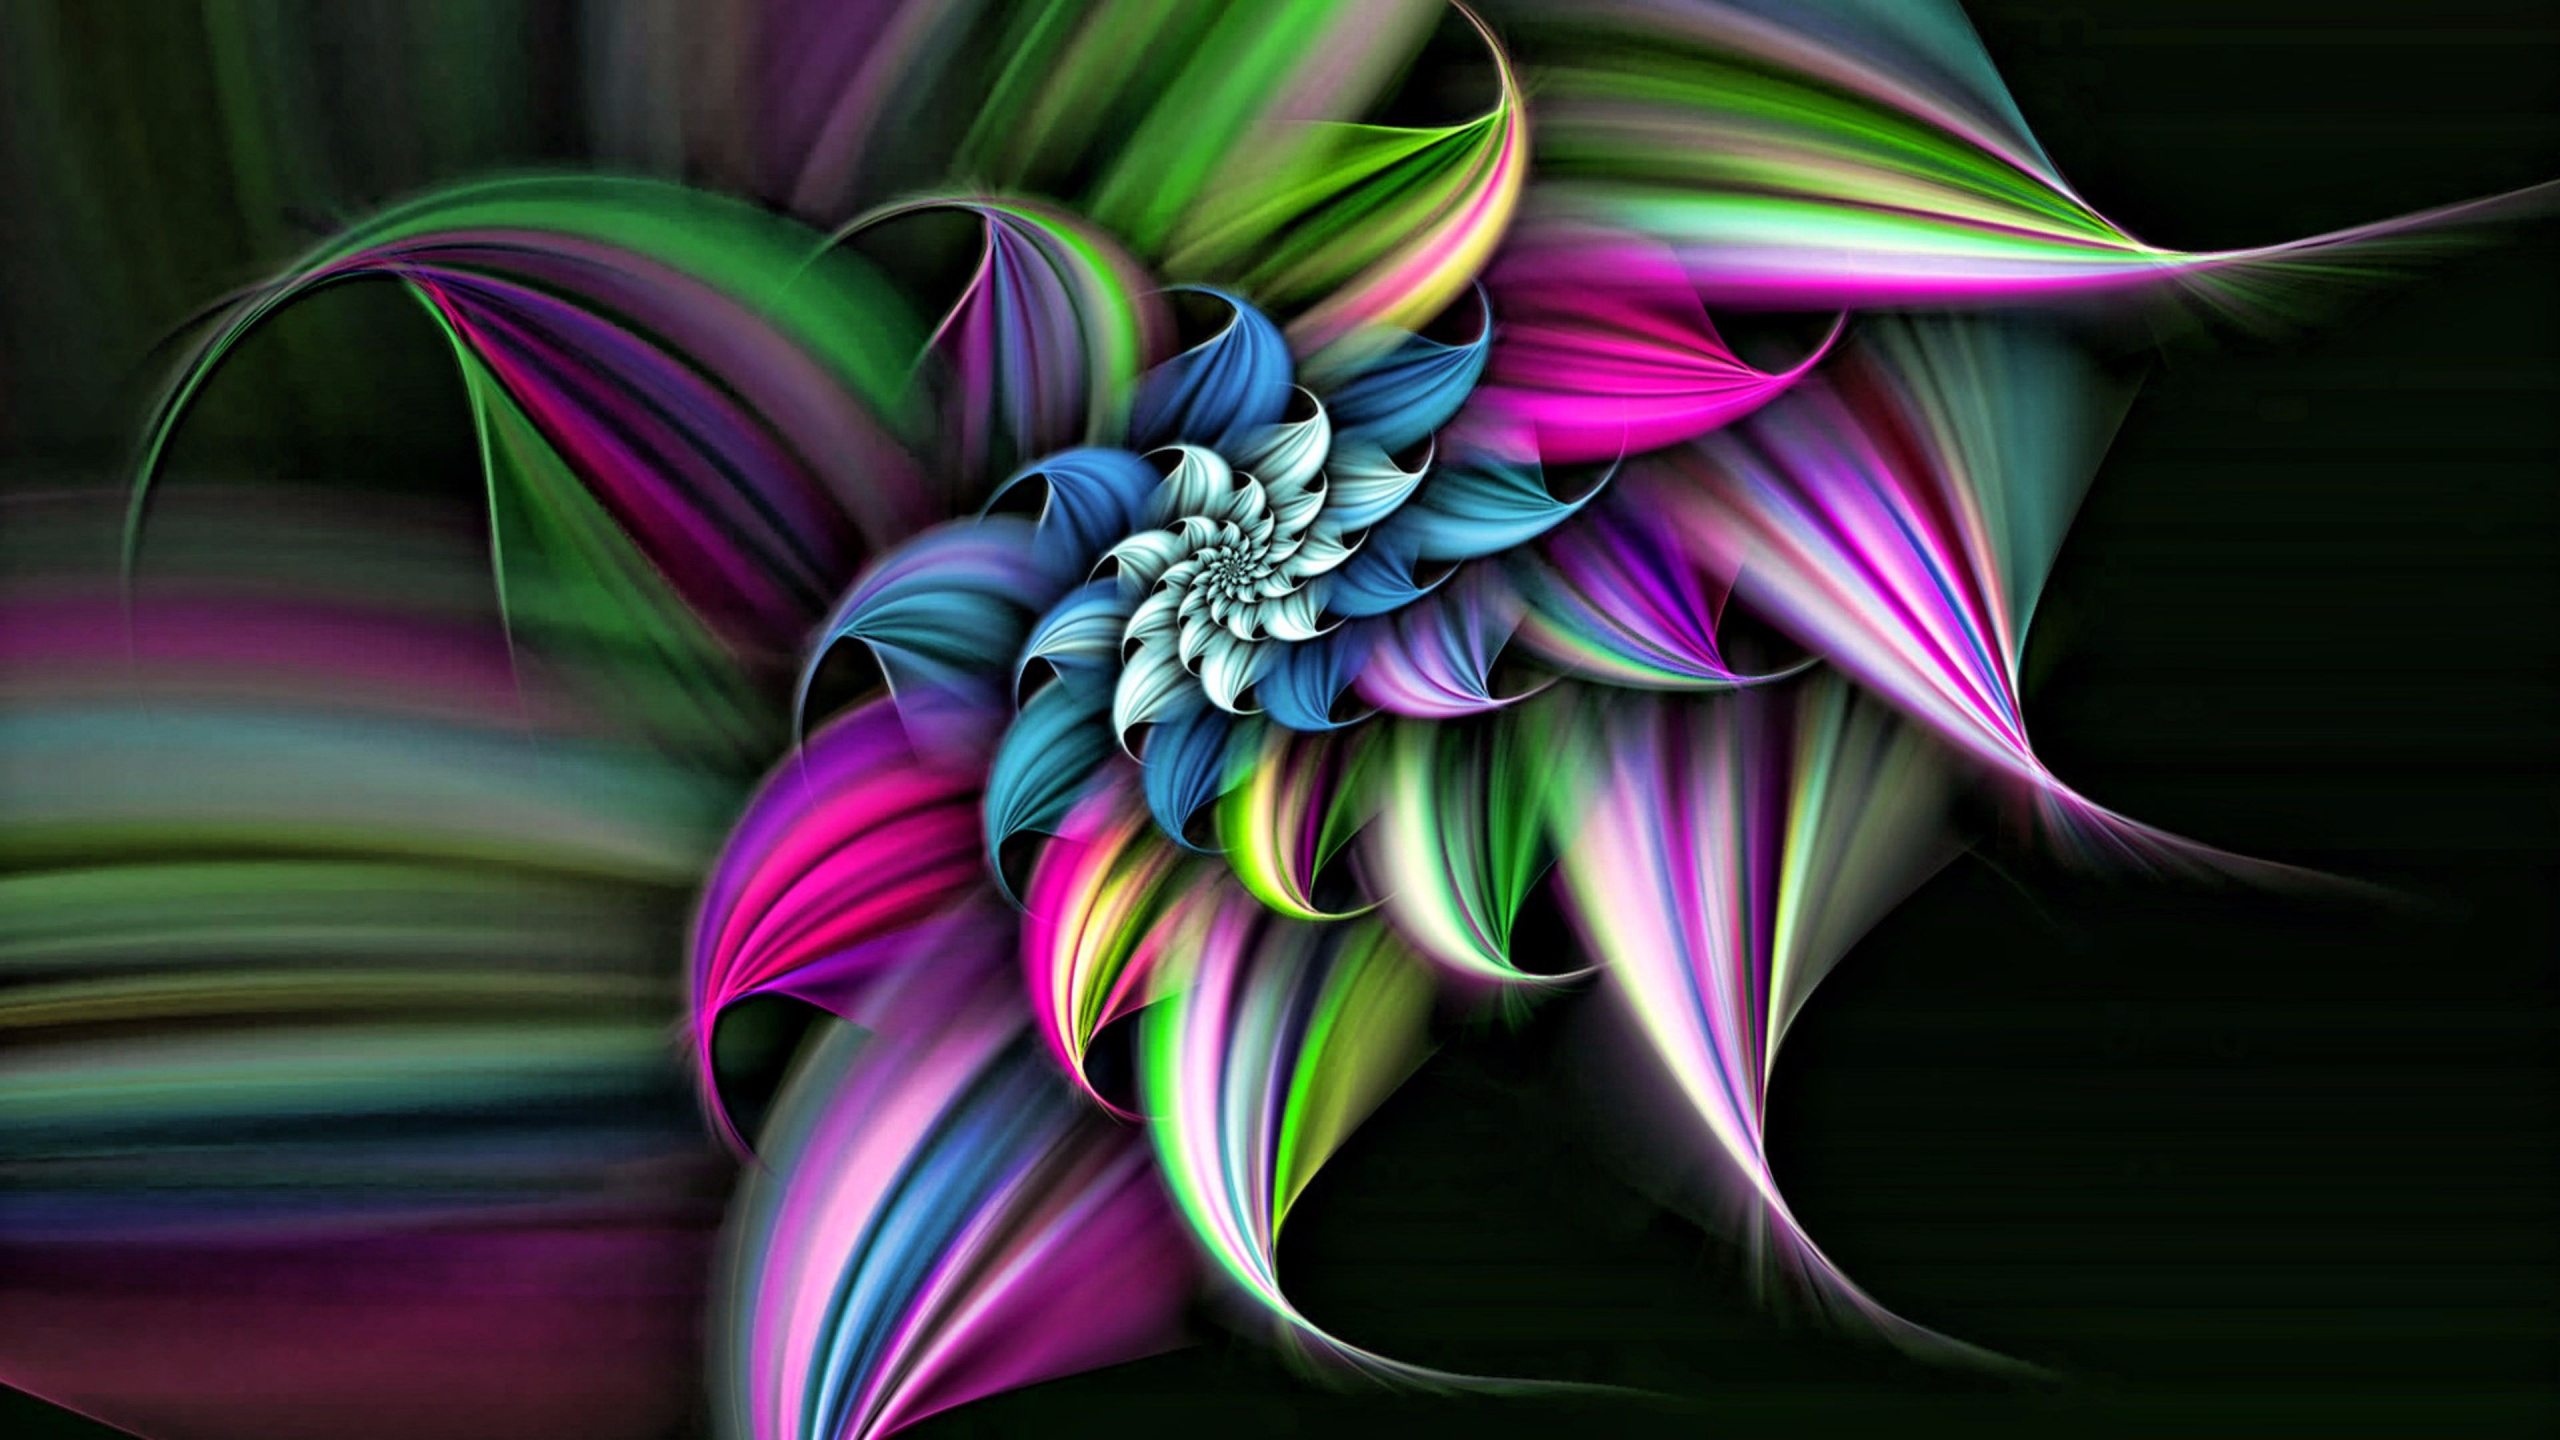 Purple and Green Flower Illustration. Wallpaper in 2560x1440 Resolution